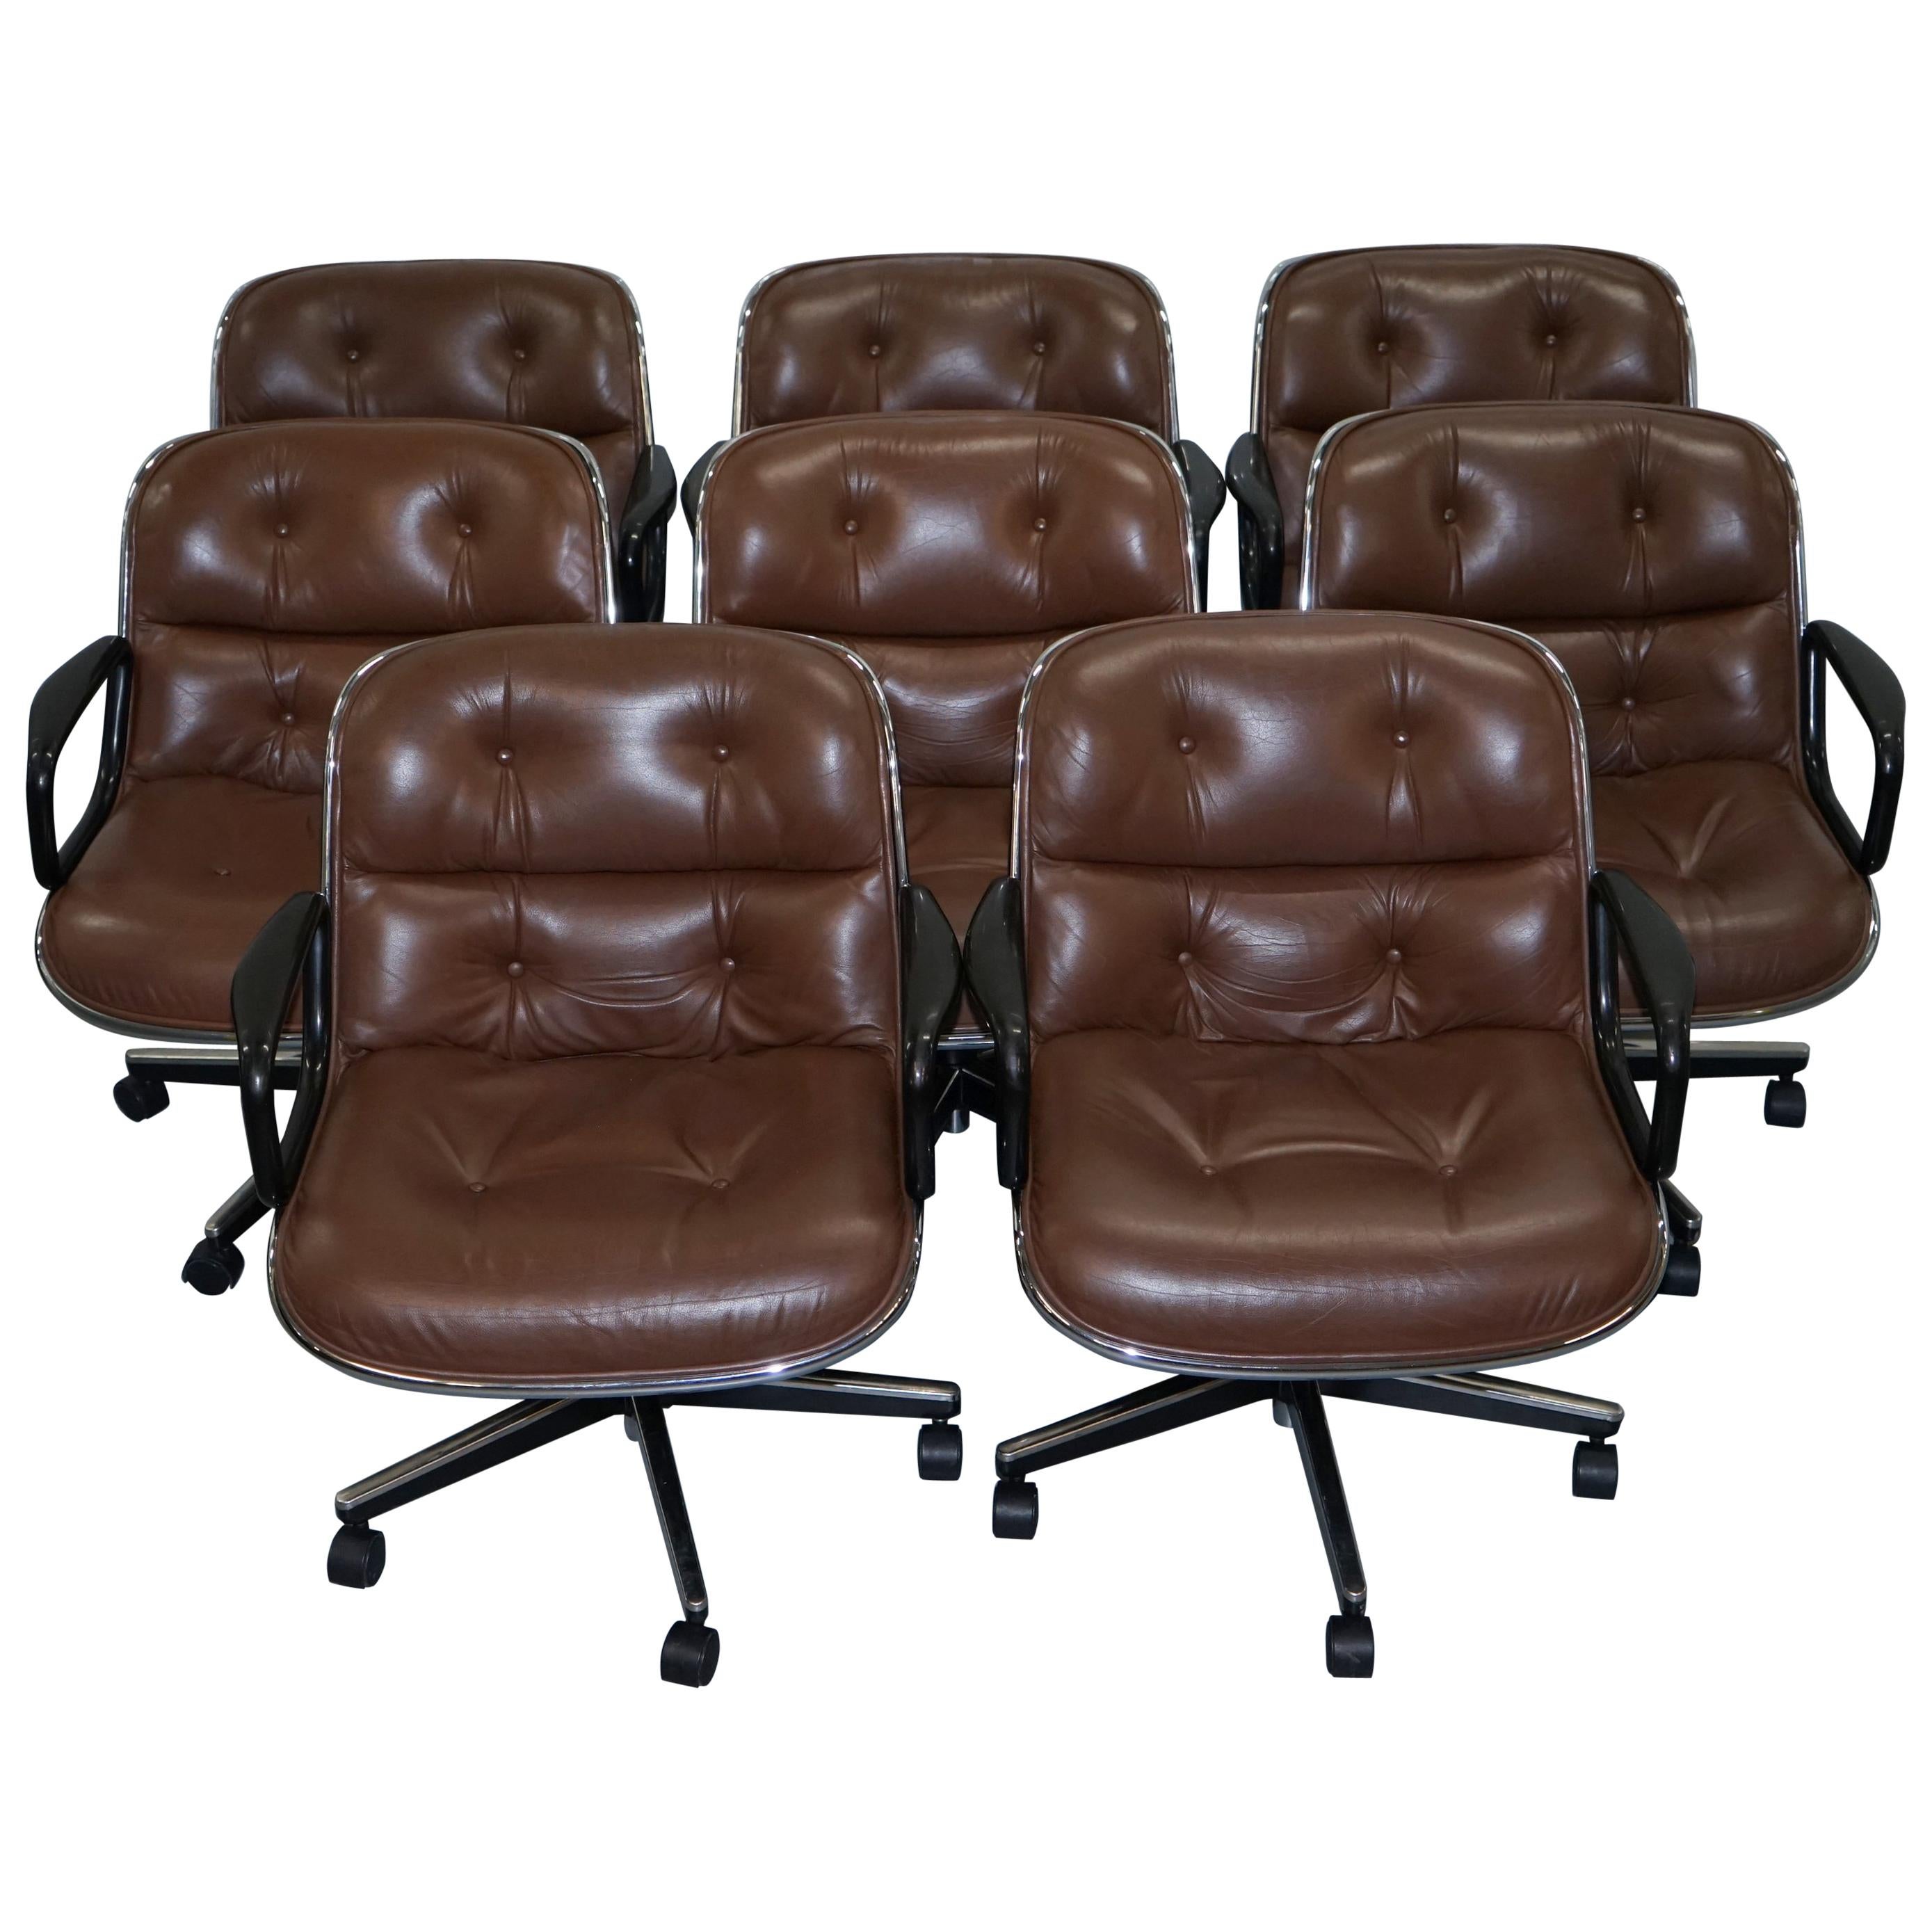 One of Eight Original Knoll Pollock Vintage Brown Leather Executive Armchairs